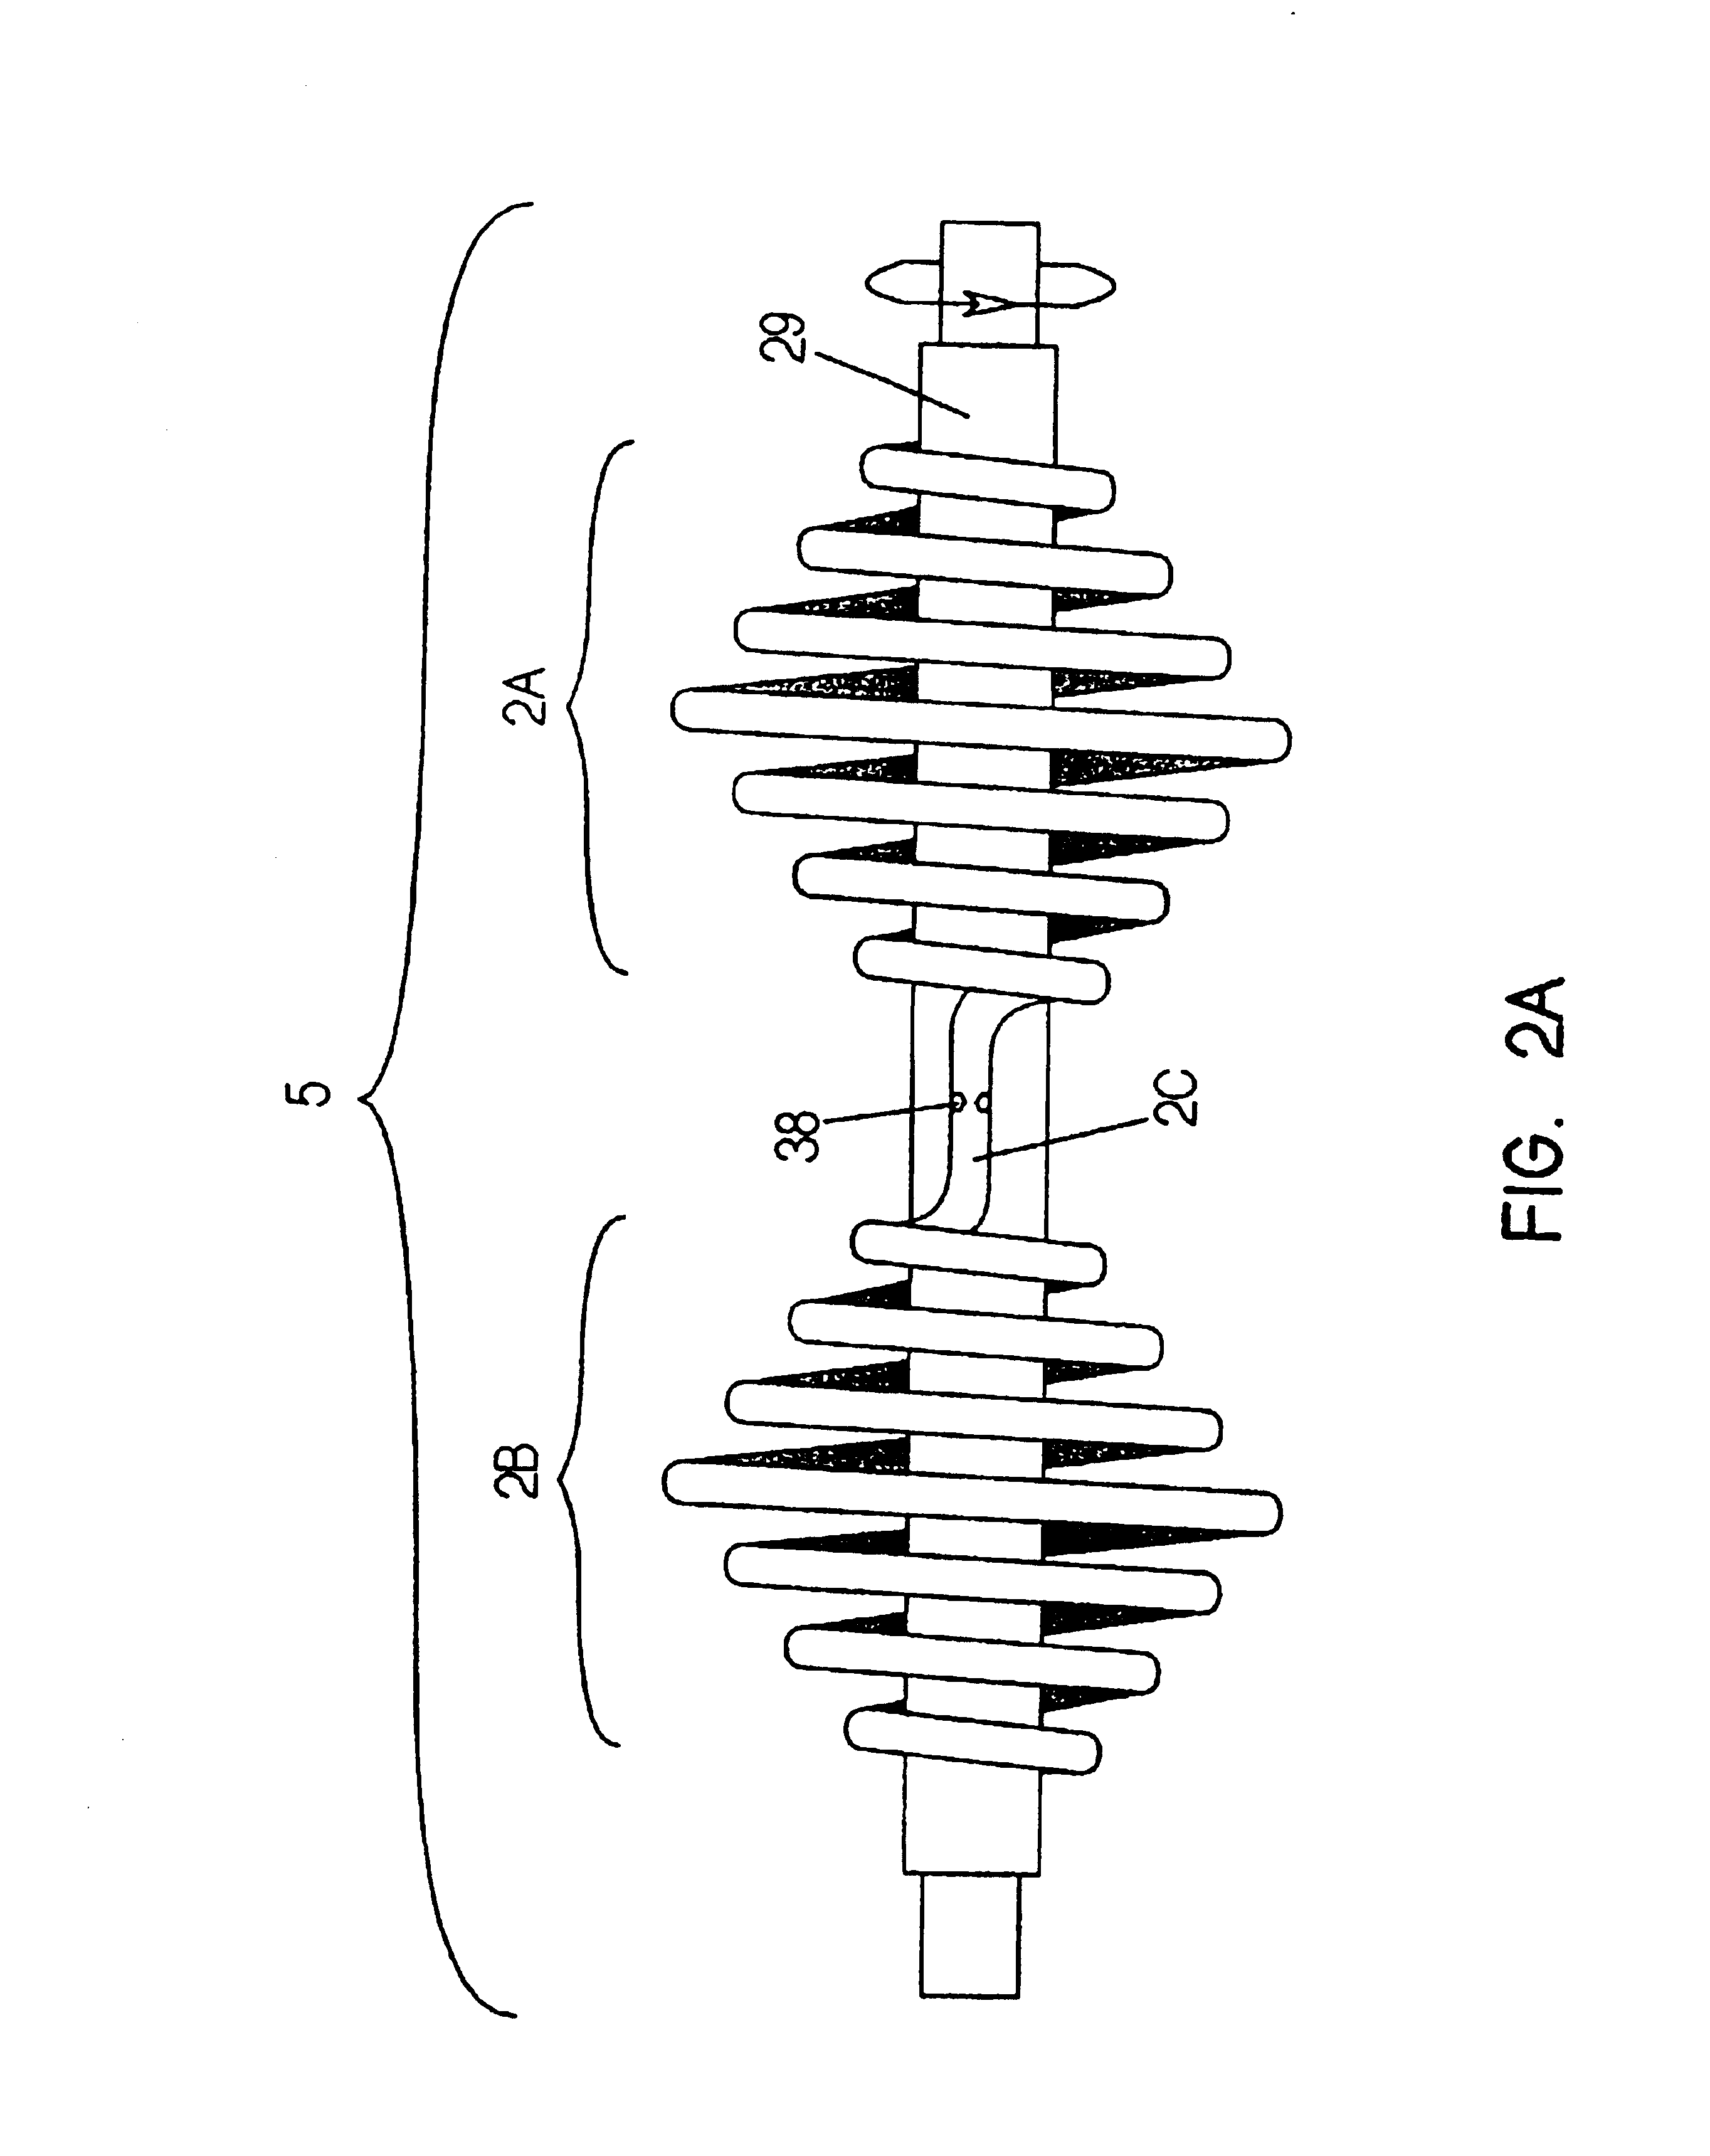 Centrifugal heat transfer engine and heat transfer systems embodying the same